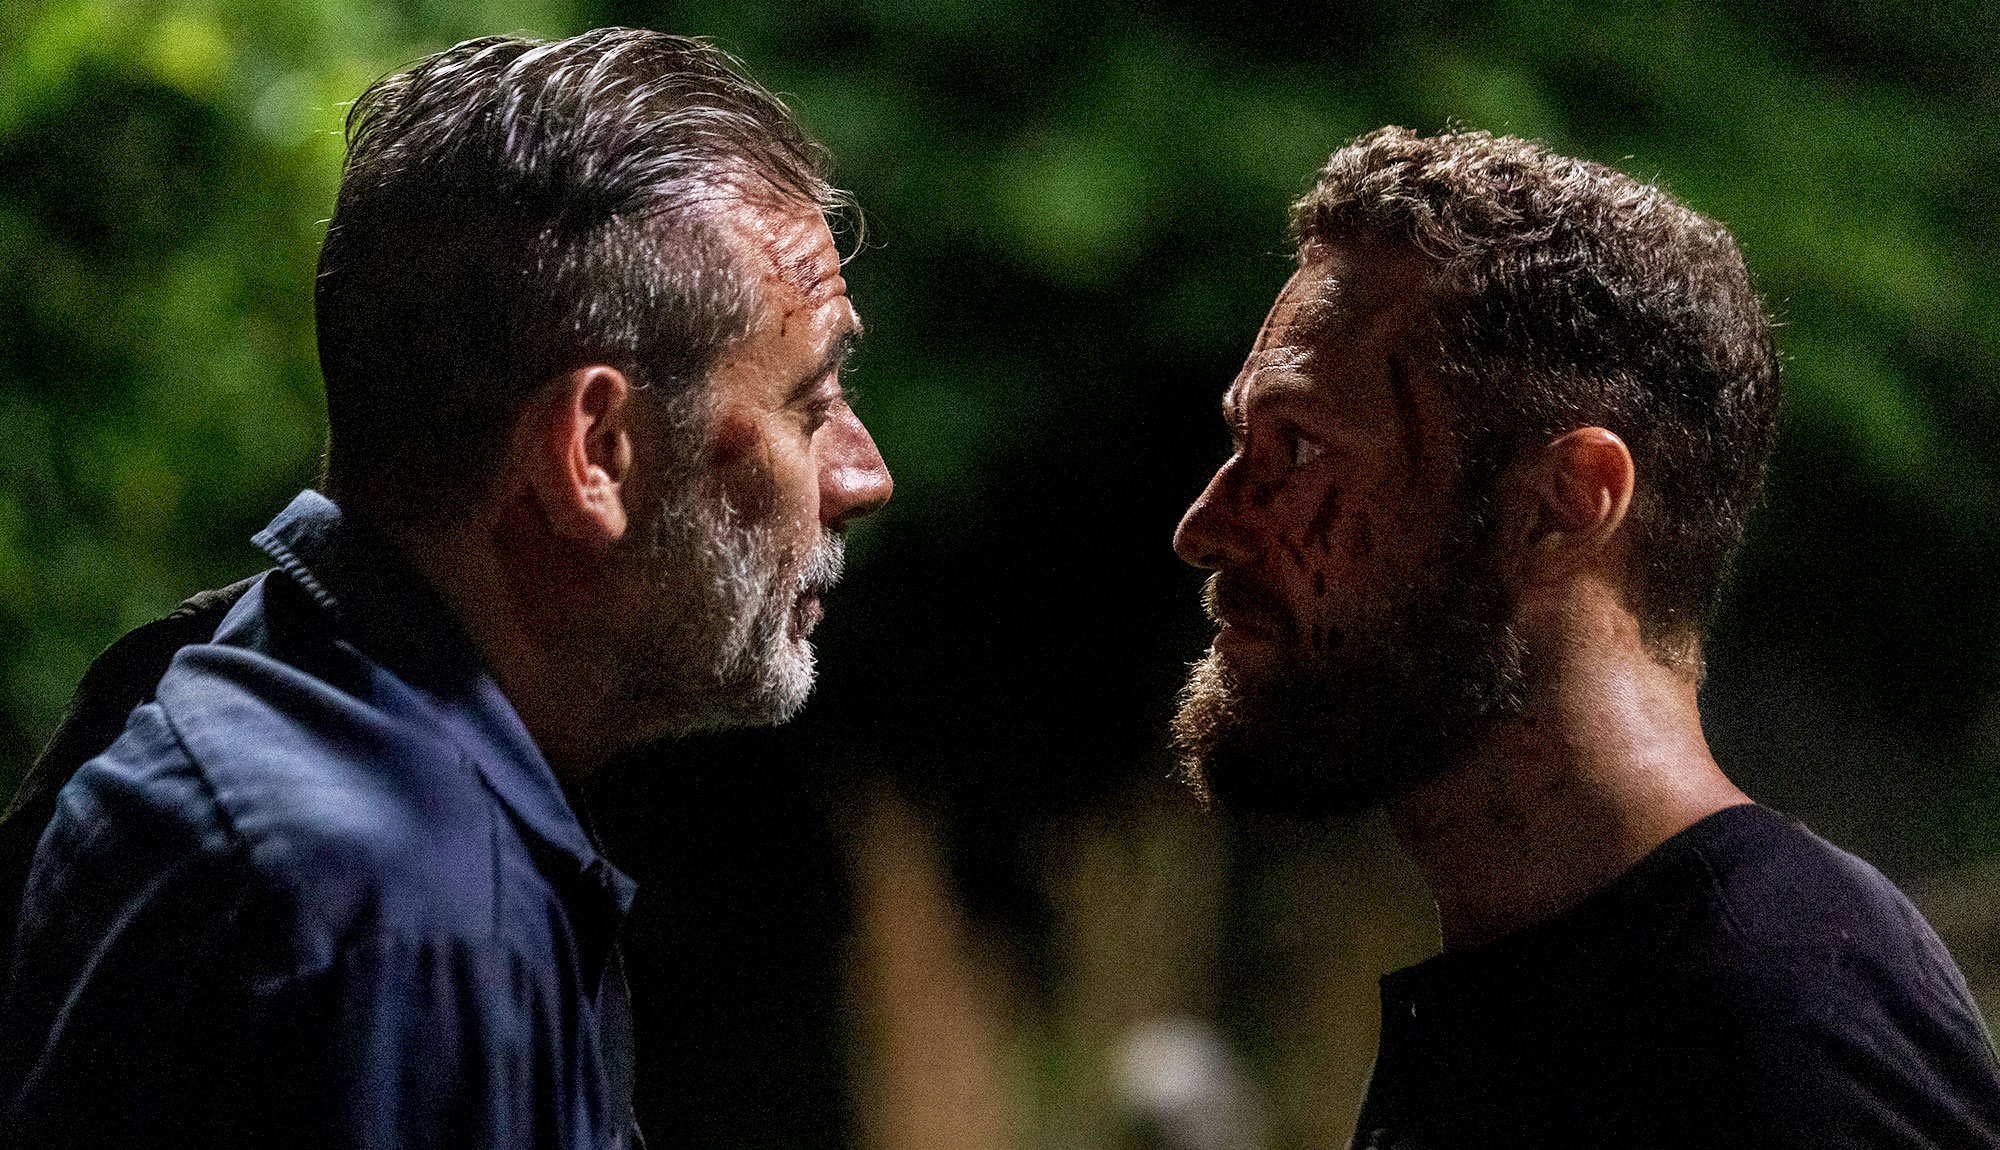 Negan & Aaron Come Face To Face In Walking Dead Episode 1003 Images